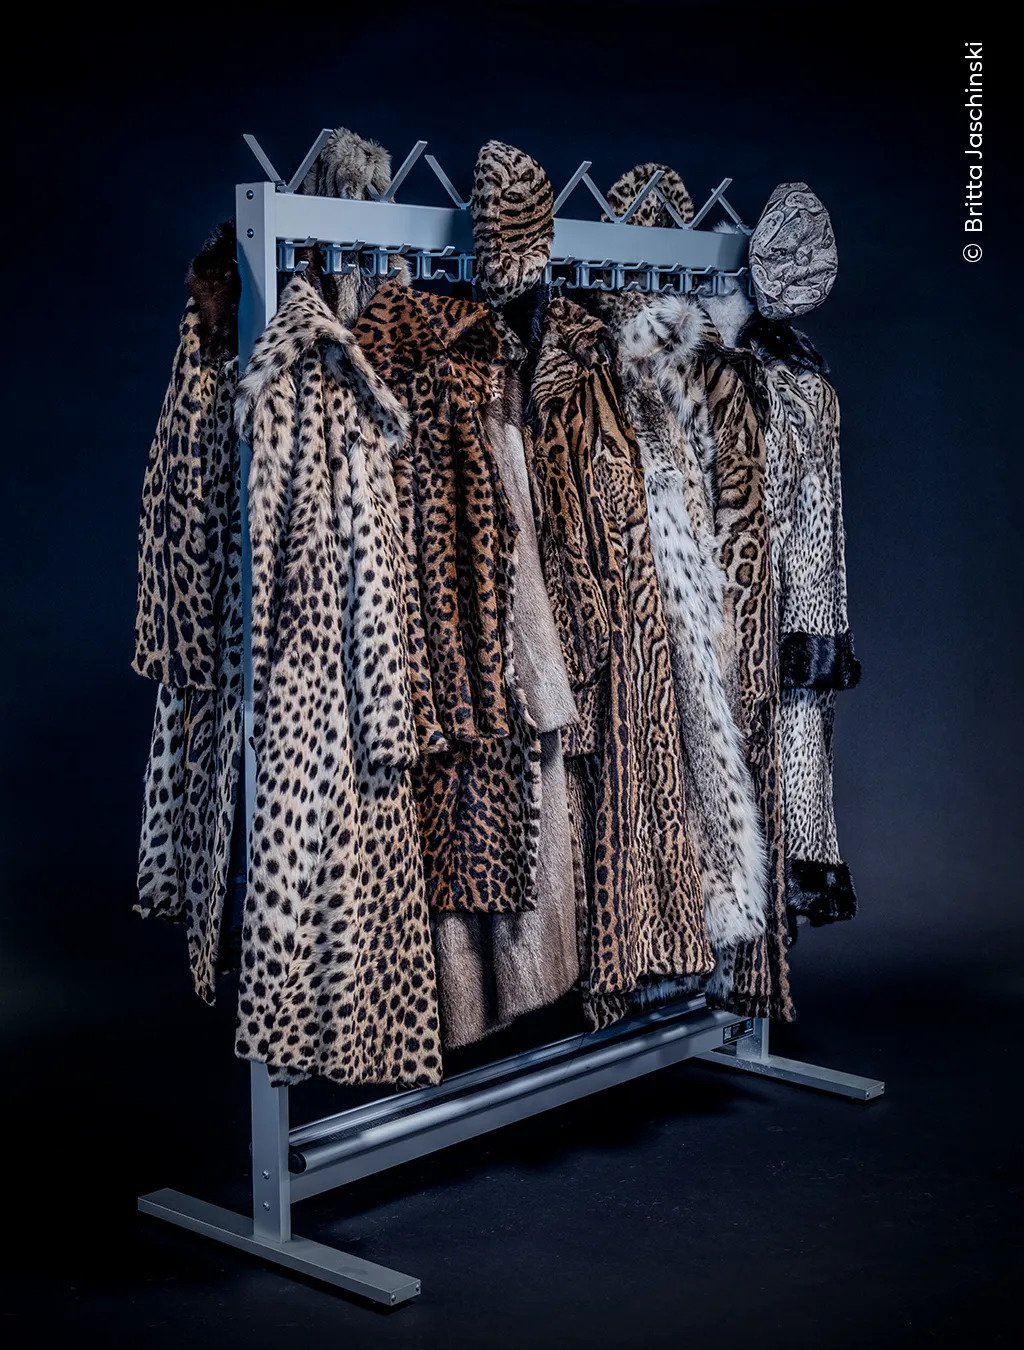 A rack of coats made from the skins of some of the most endangered big cats on Earth, including snow leopard, jaguar and ocelot